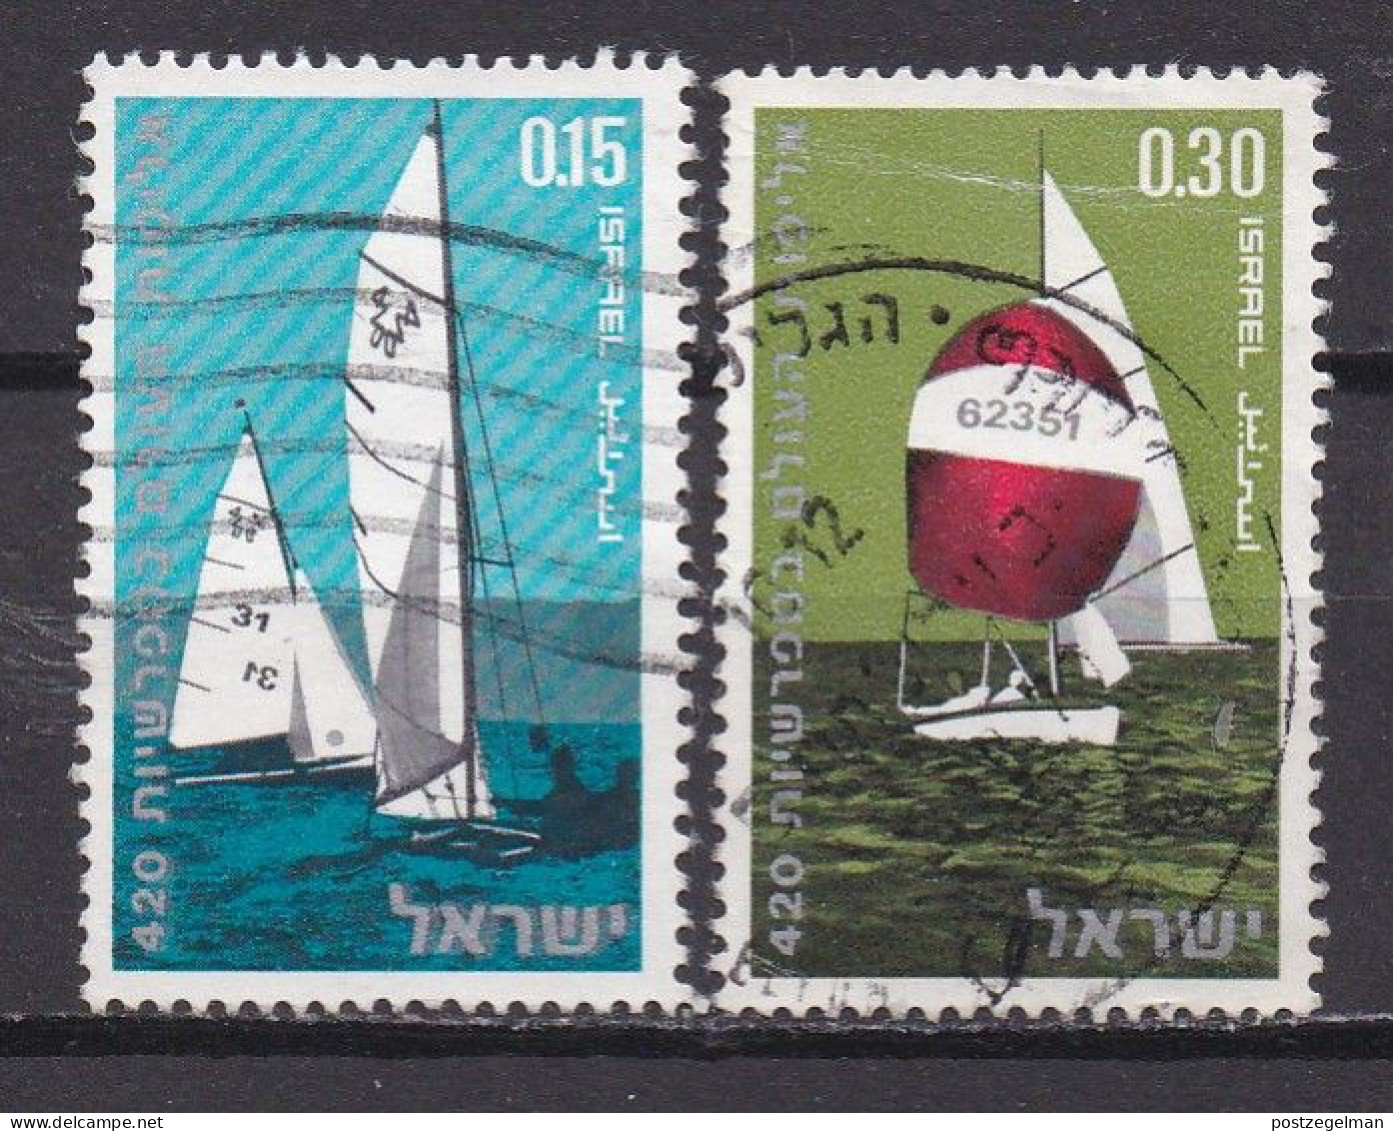 ISRAEL, 1970, Used Stamp(s), Without Tab, Sailing Championship, SG Number 451-453, Scan Number 17411 (2 Values) - Used Stamps (without Tabs)